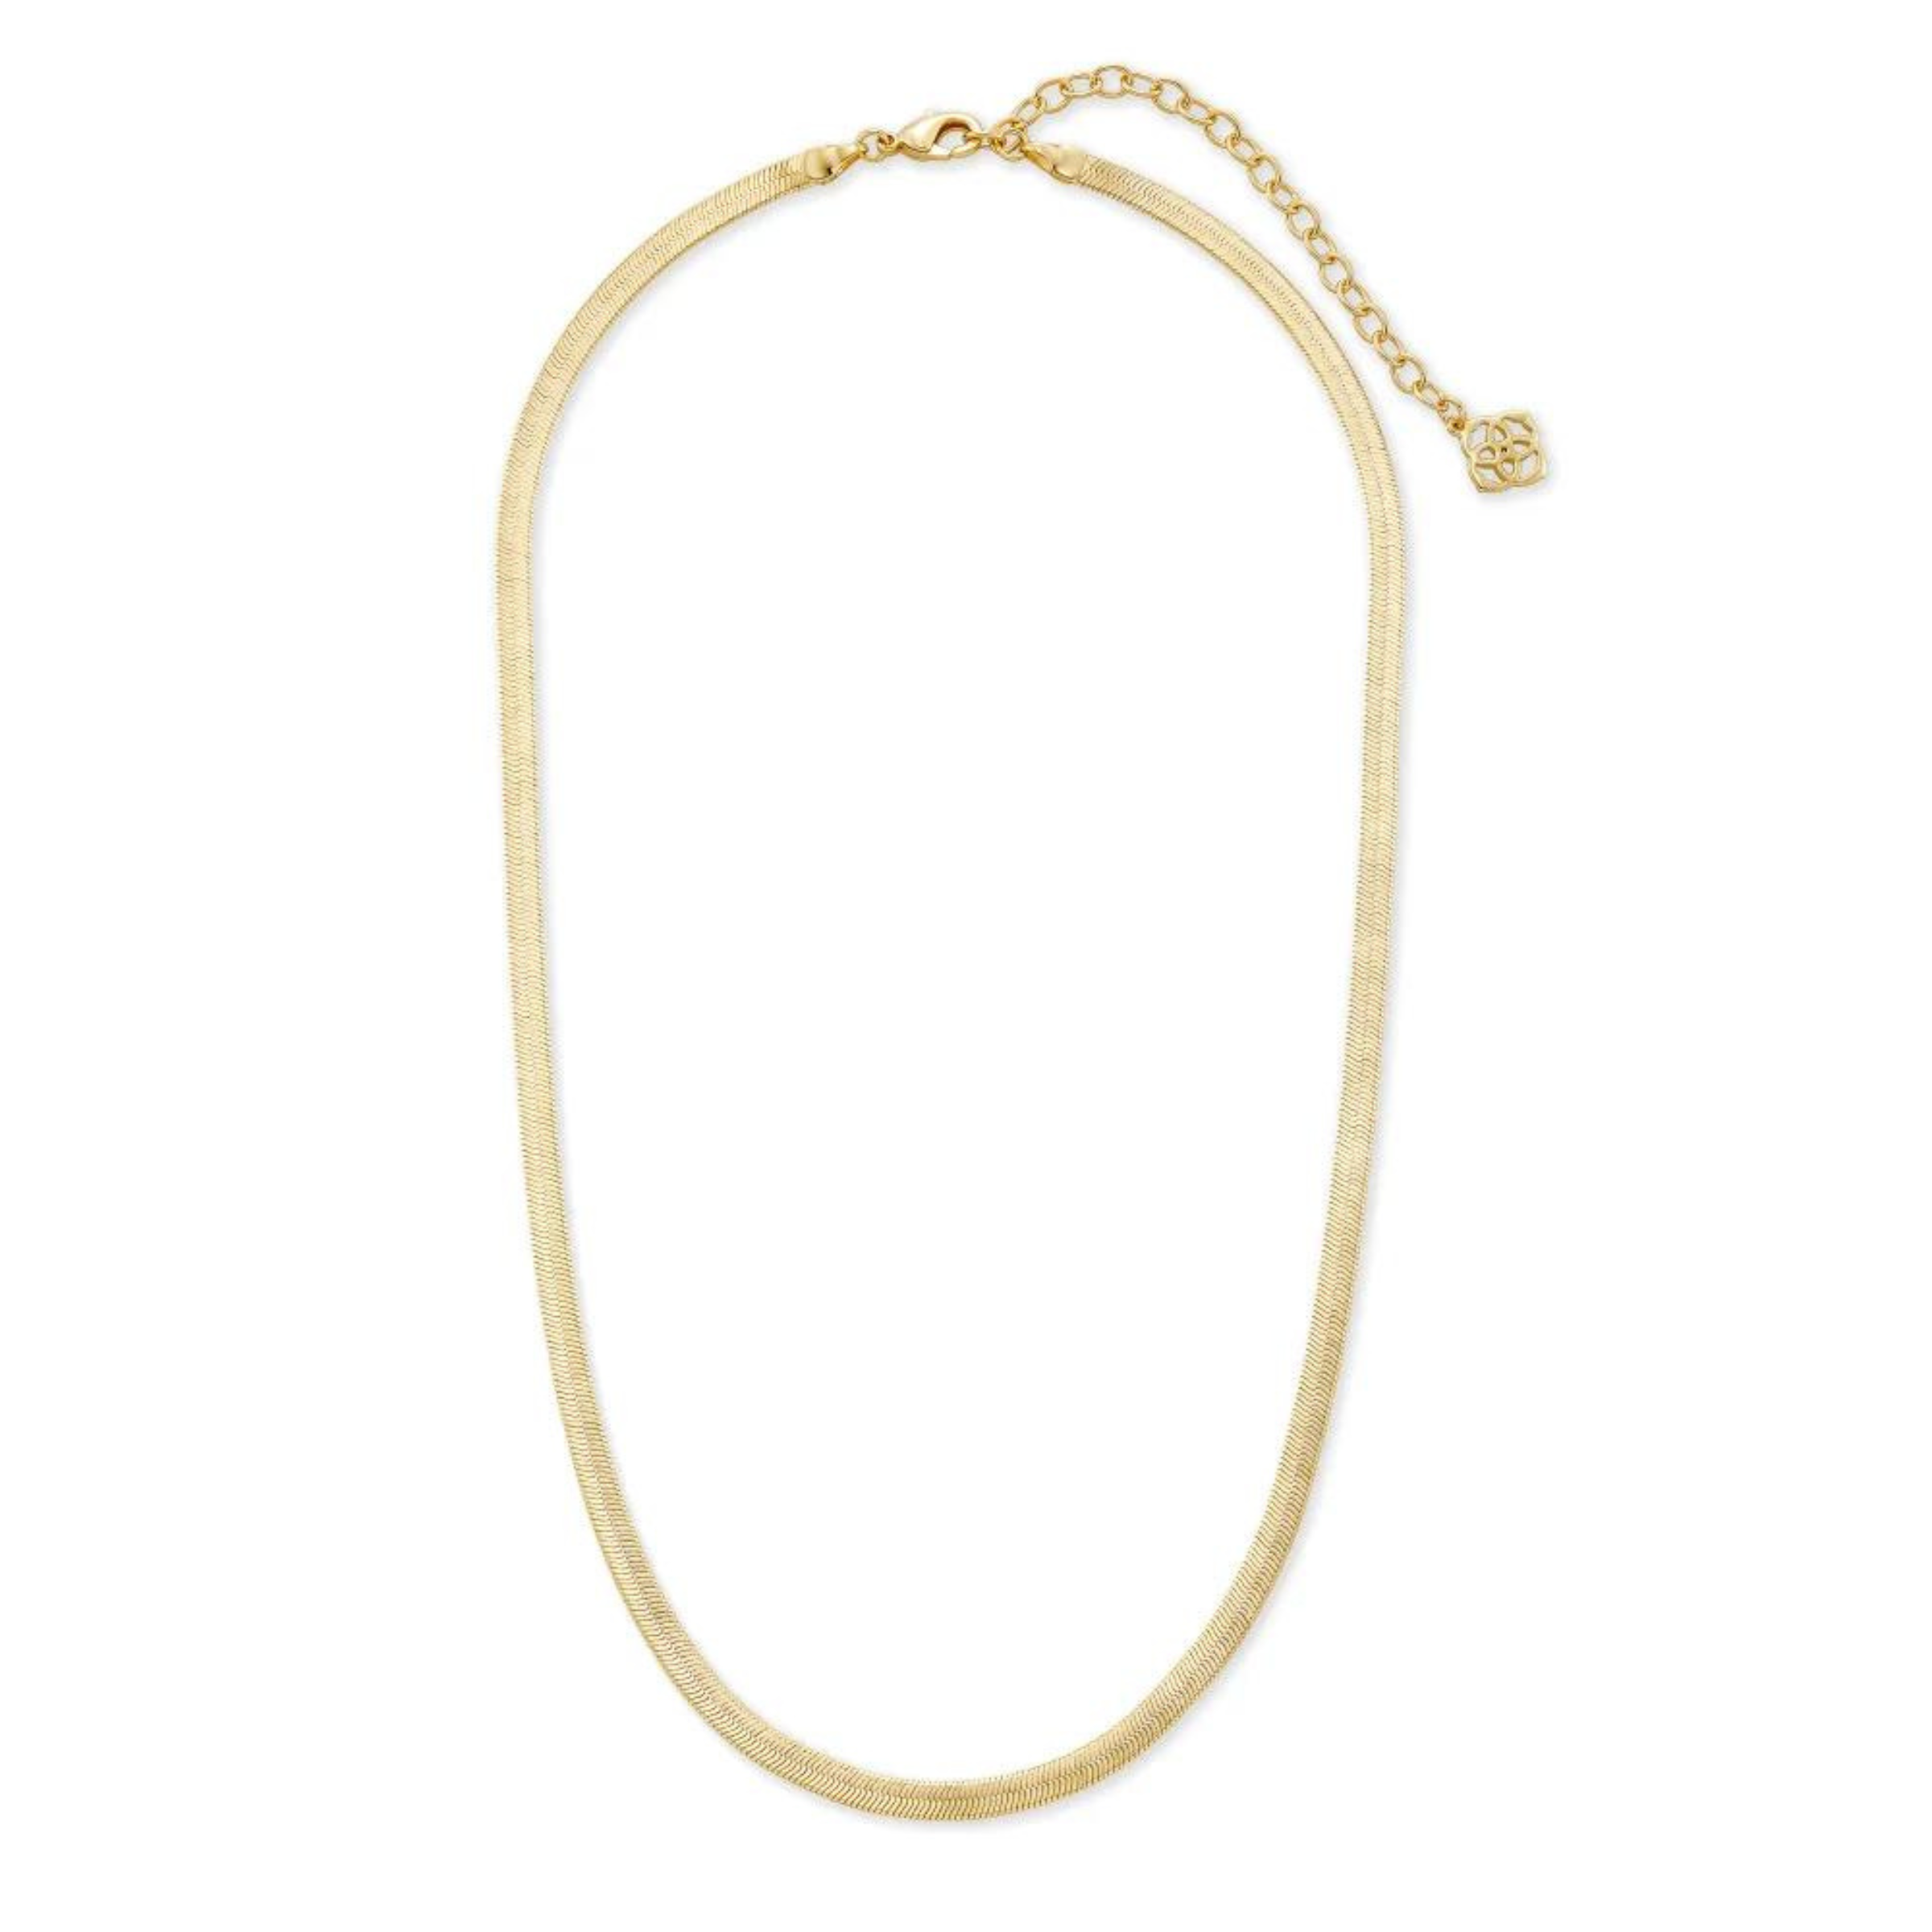 Kendra Scott | Kassie Chain Necklace in Gold - Giddy Up Glamour Boutique